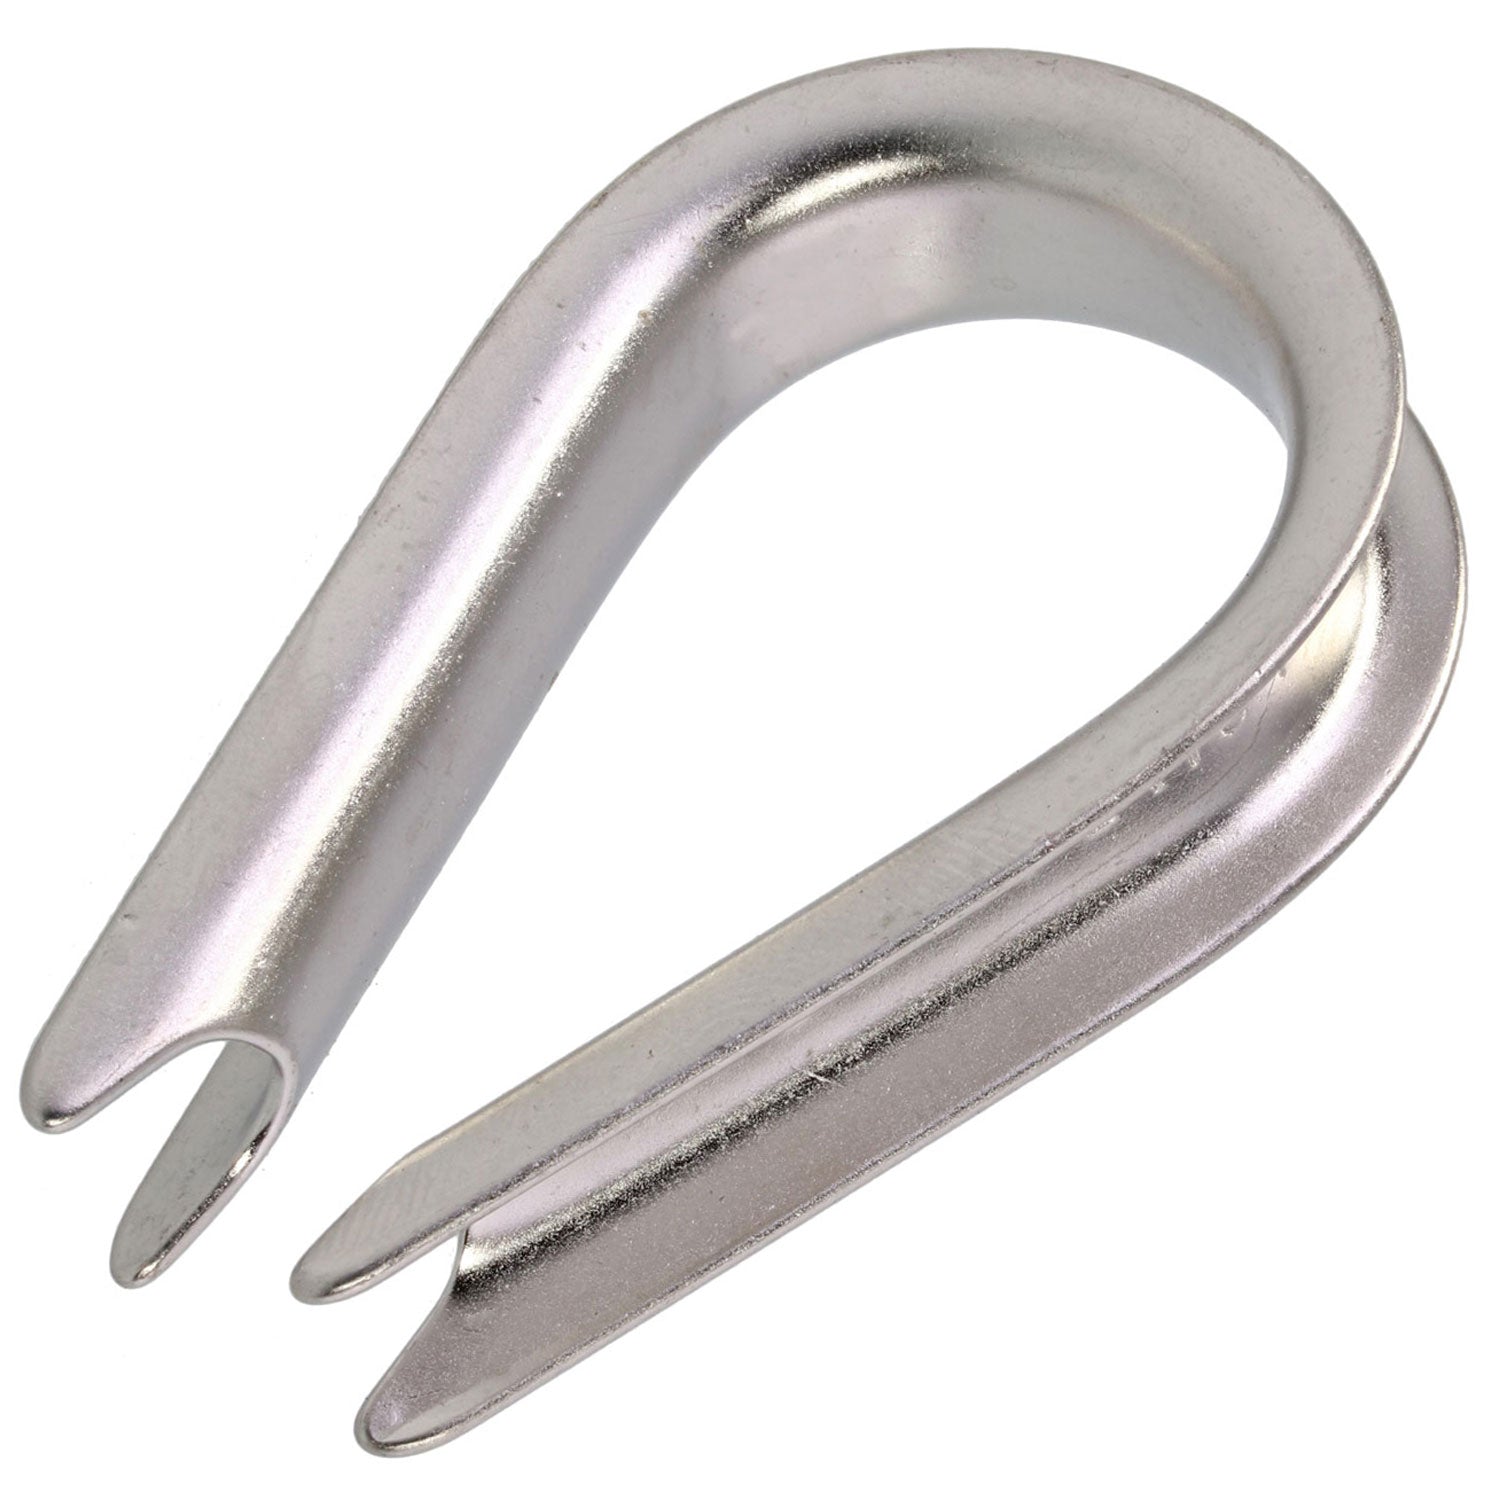 3/16 Stainless Steel Light Duty Wire Rope Thimble